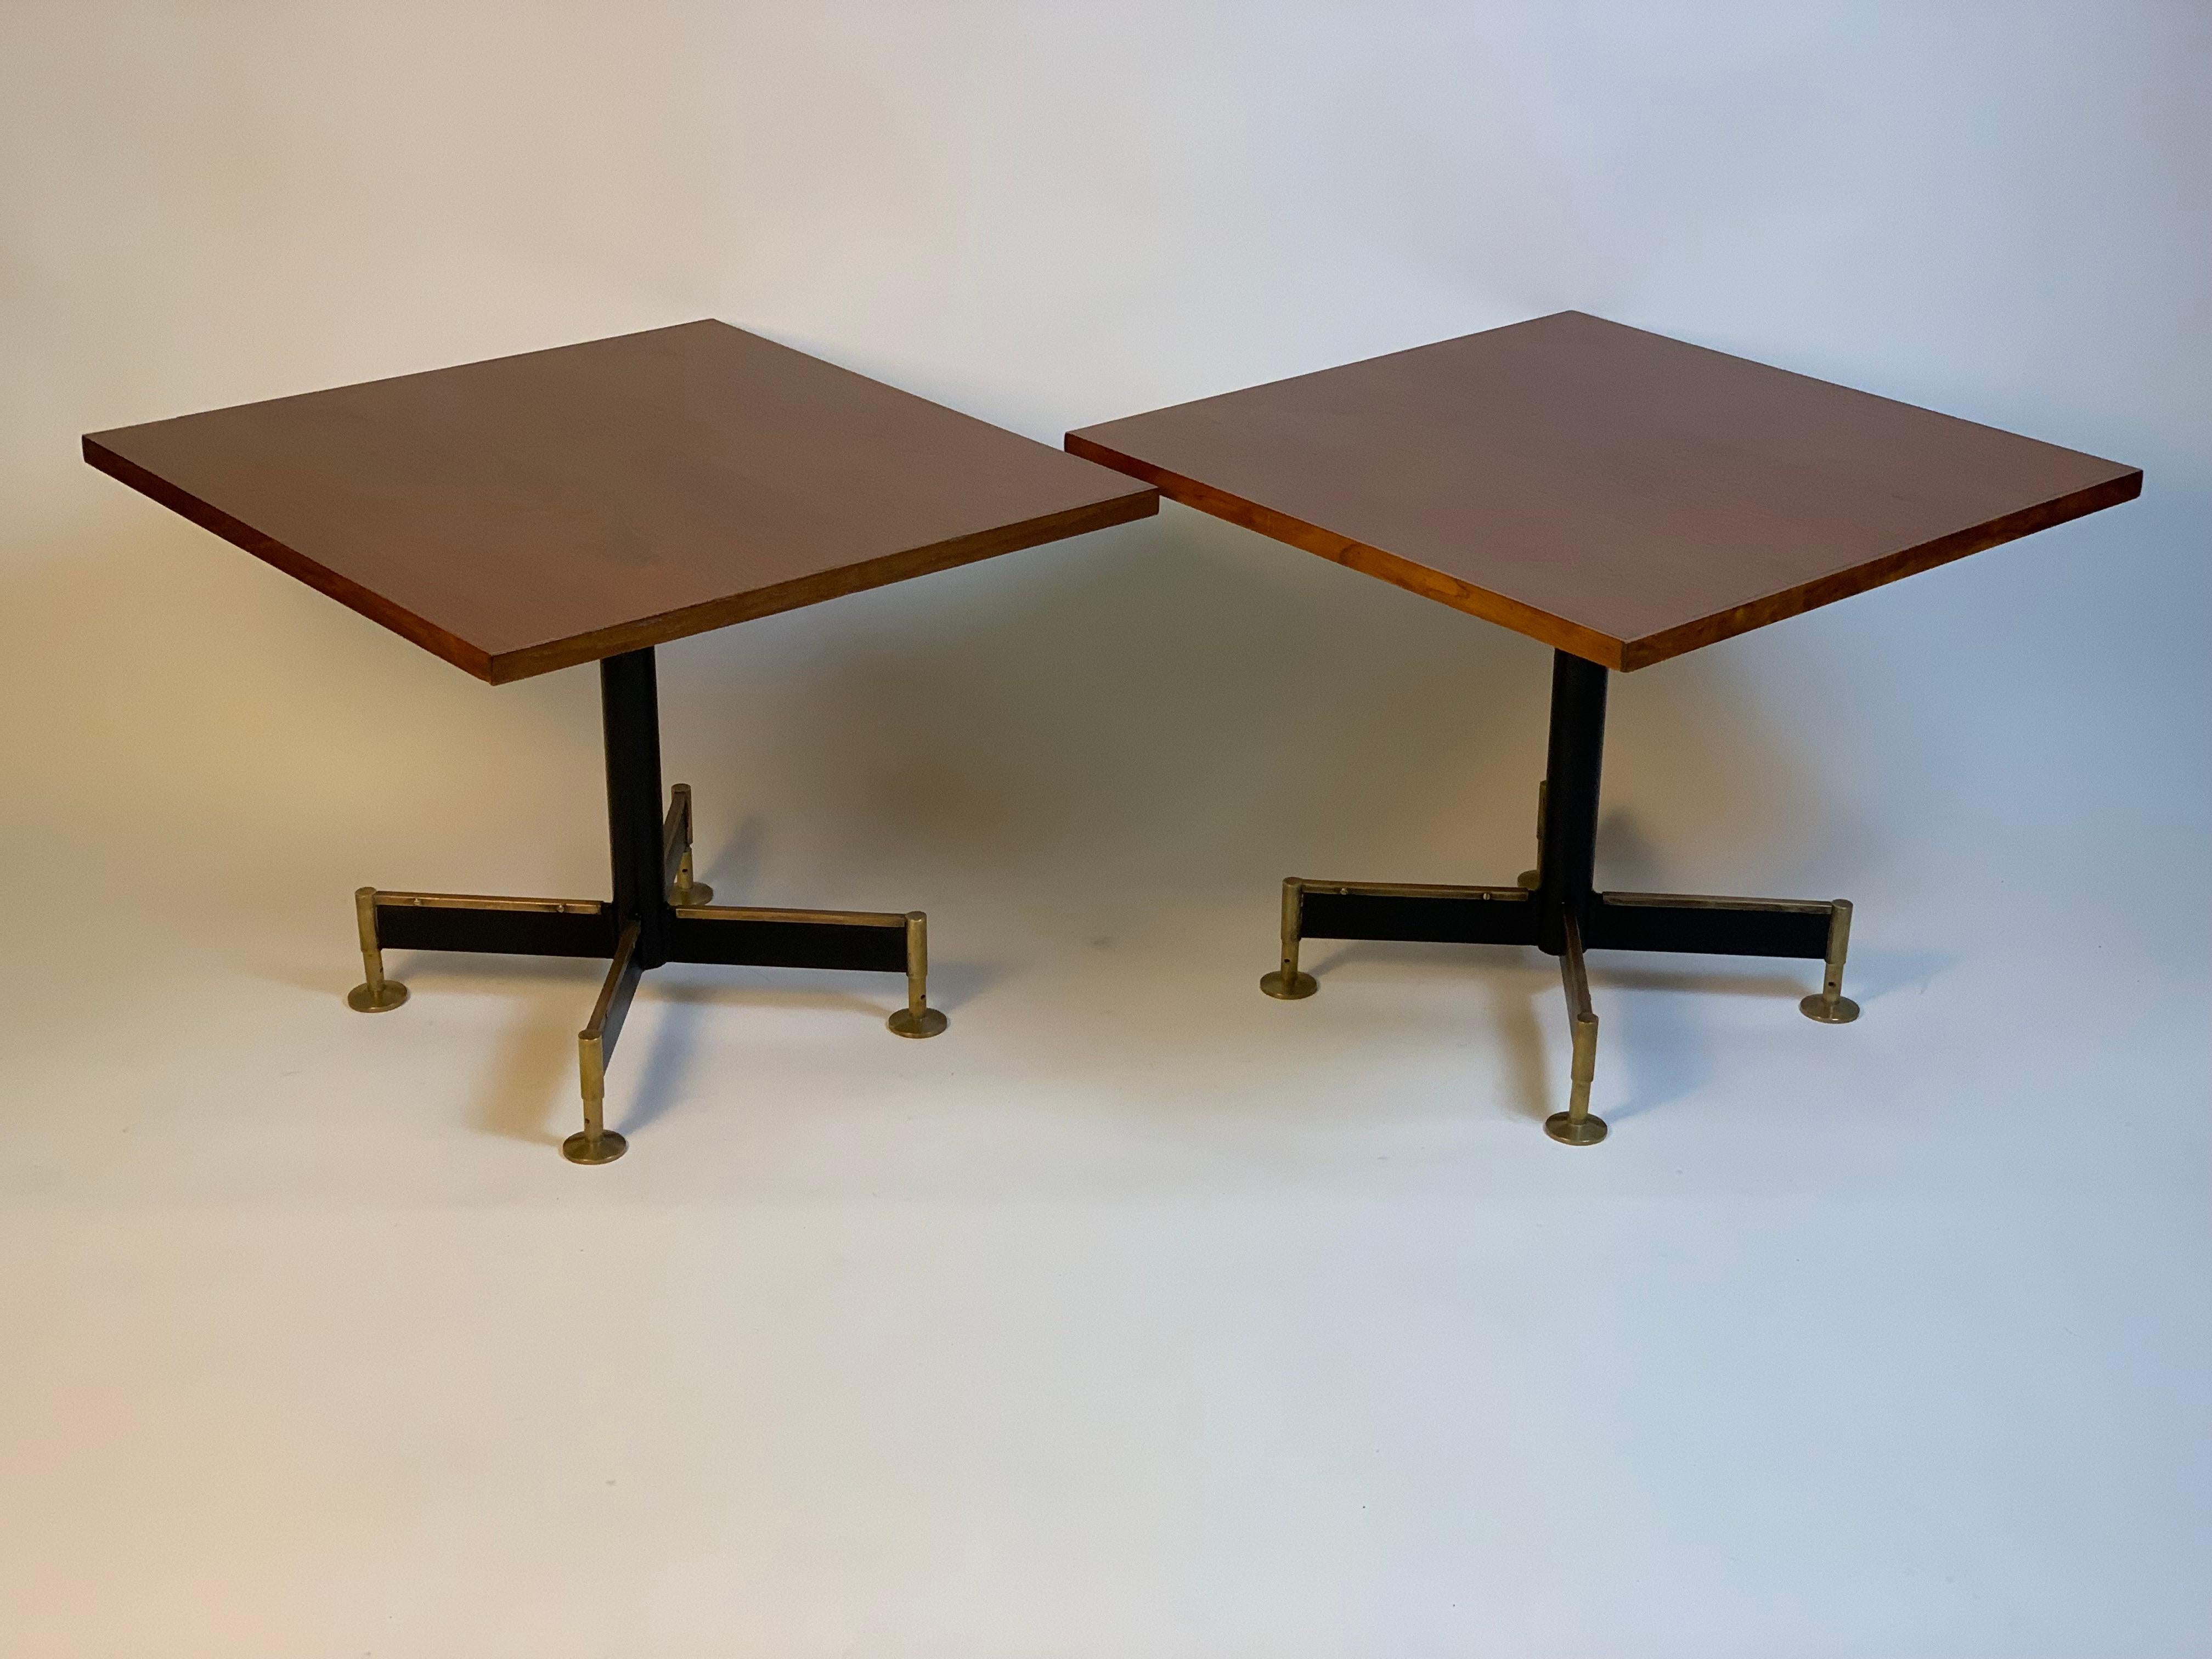 Pair of Italian coffee tables from the 1960s Mid Century Modern, the base is made up of four black lacquered iron elements with brass details, circular brass feet.
The table tops are square.
It is rare to find pairs of tables to be placed next to